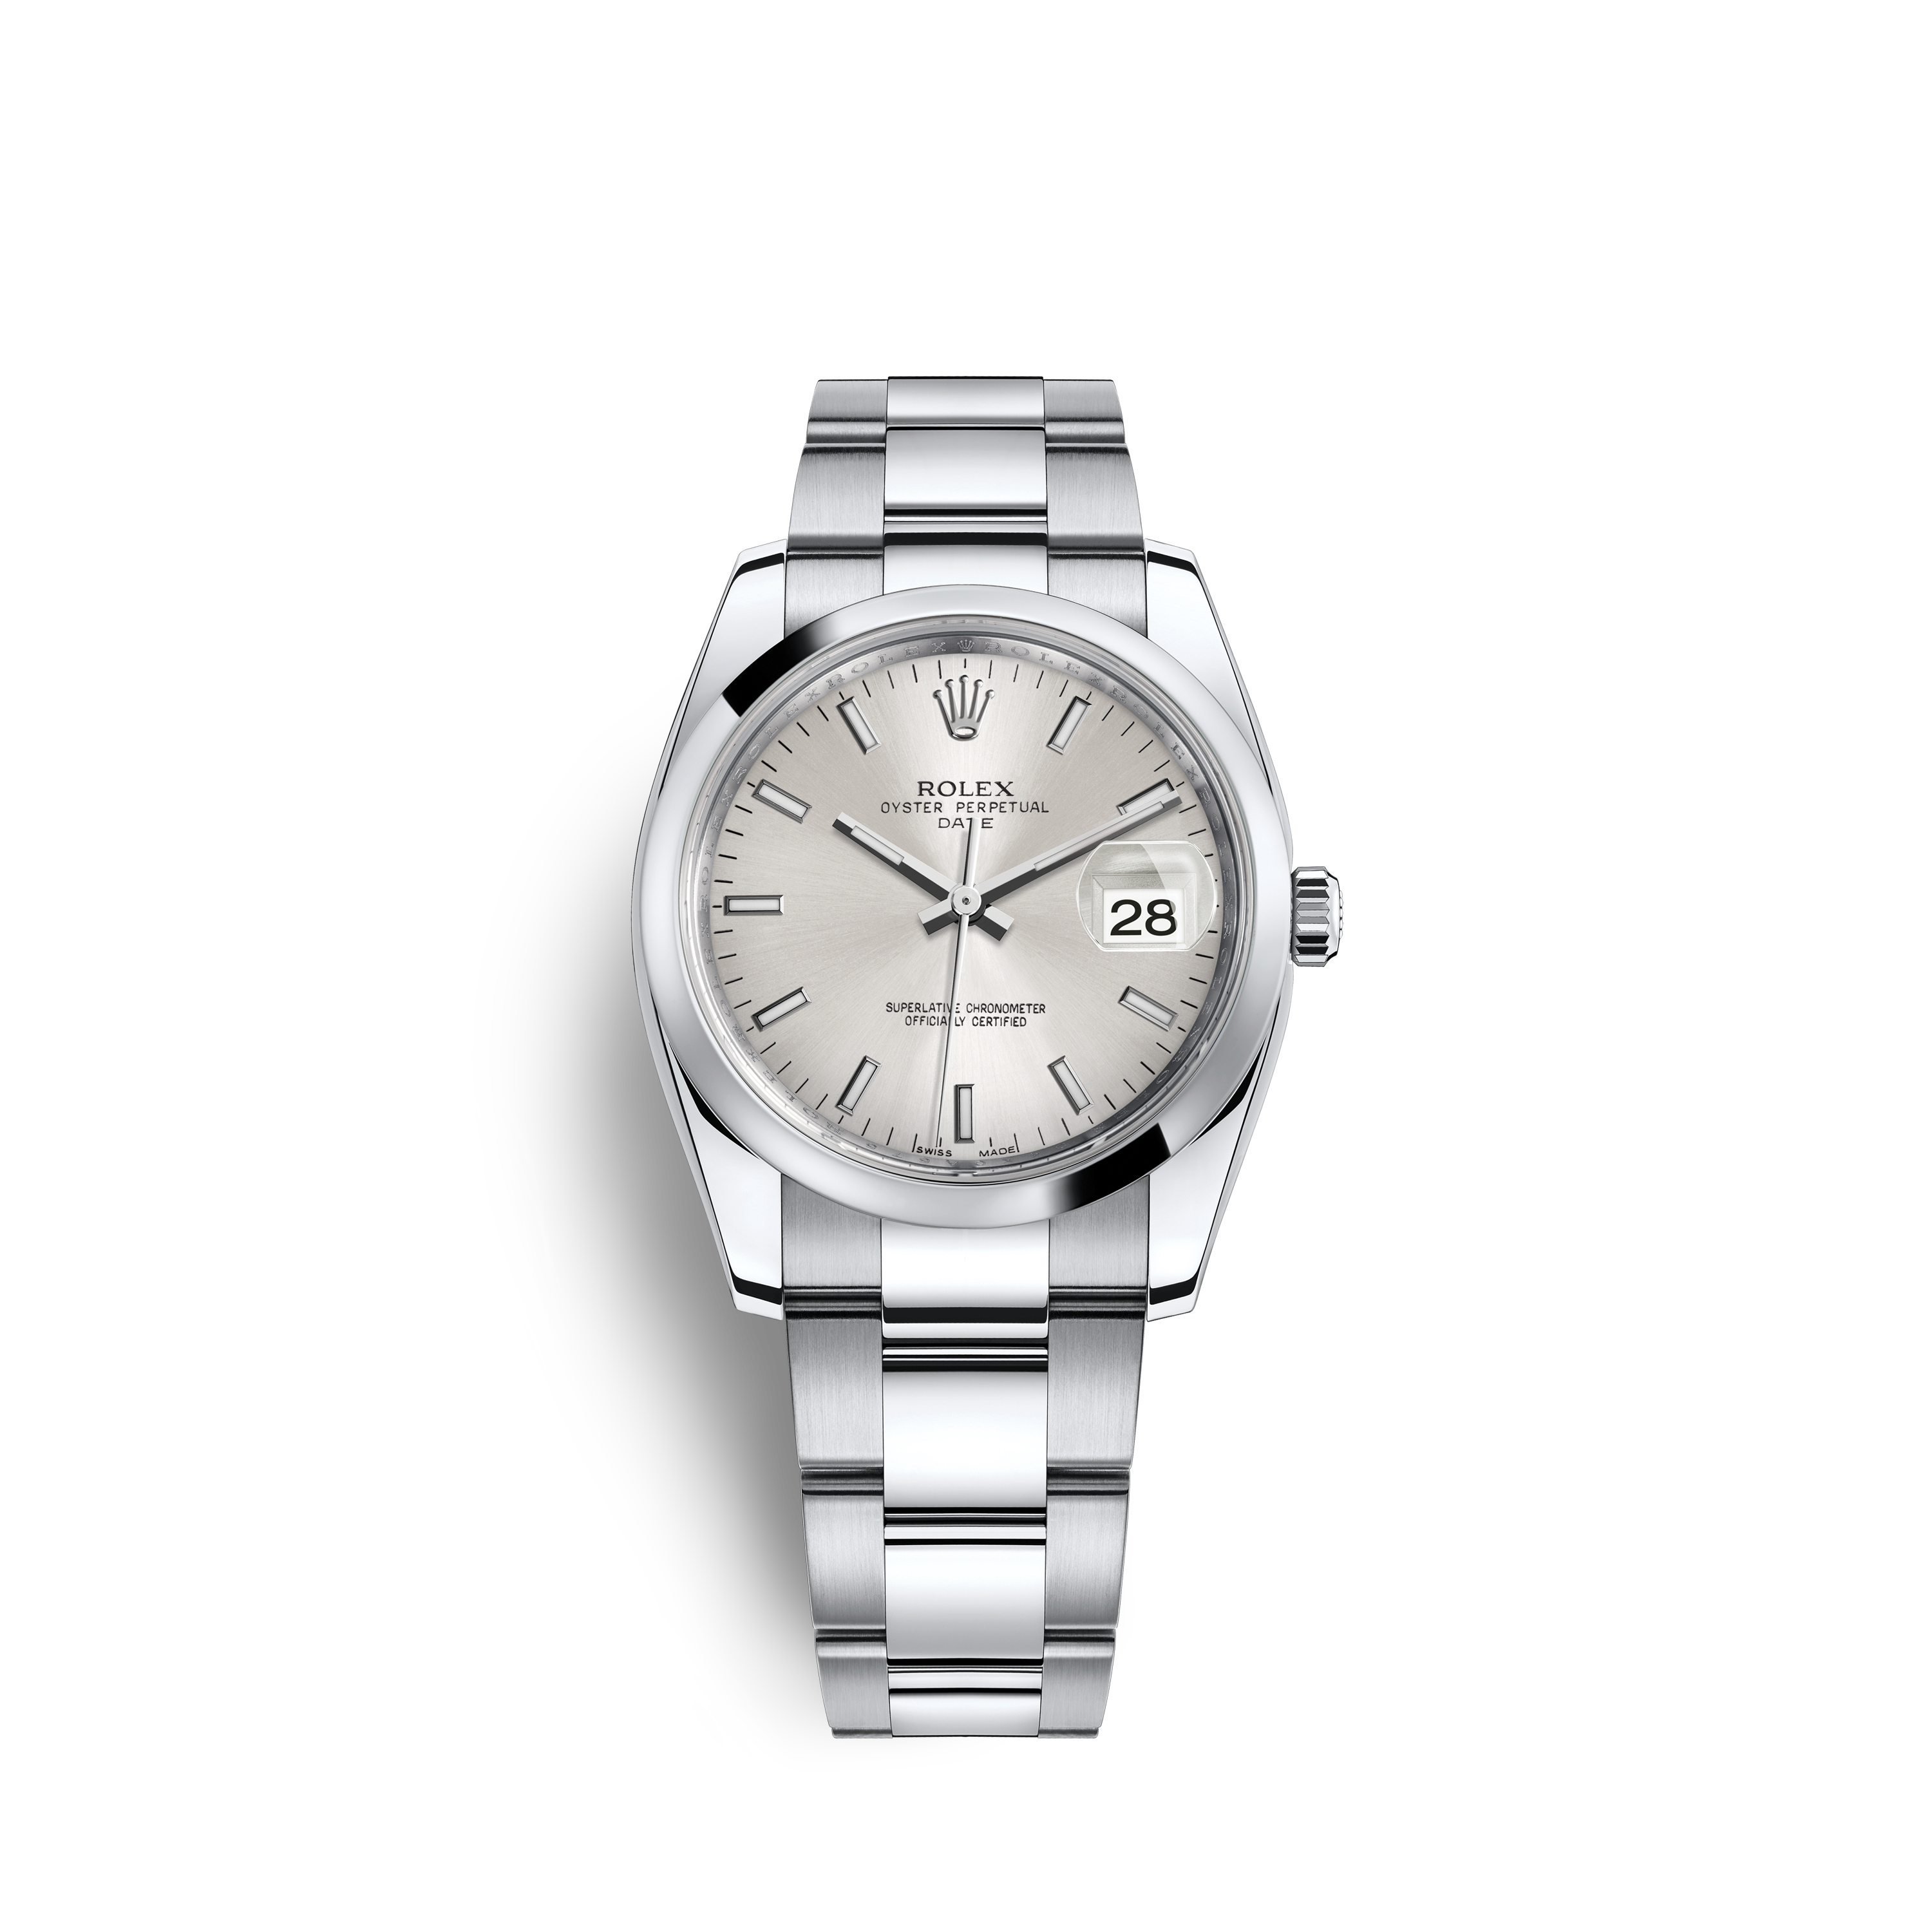 Do Fake Omega Watches Have Sapphire Crystal